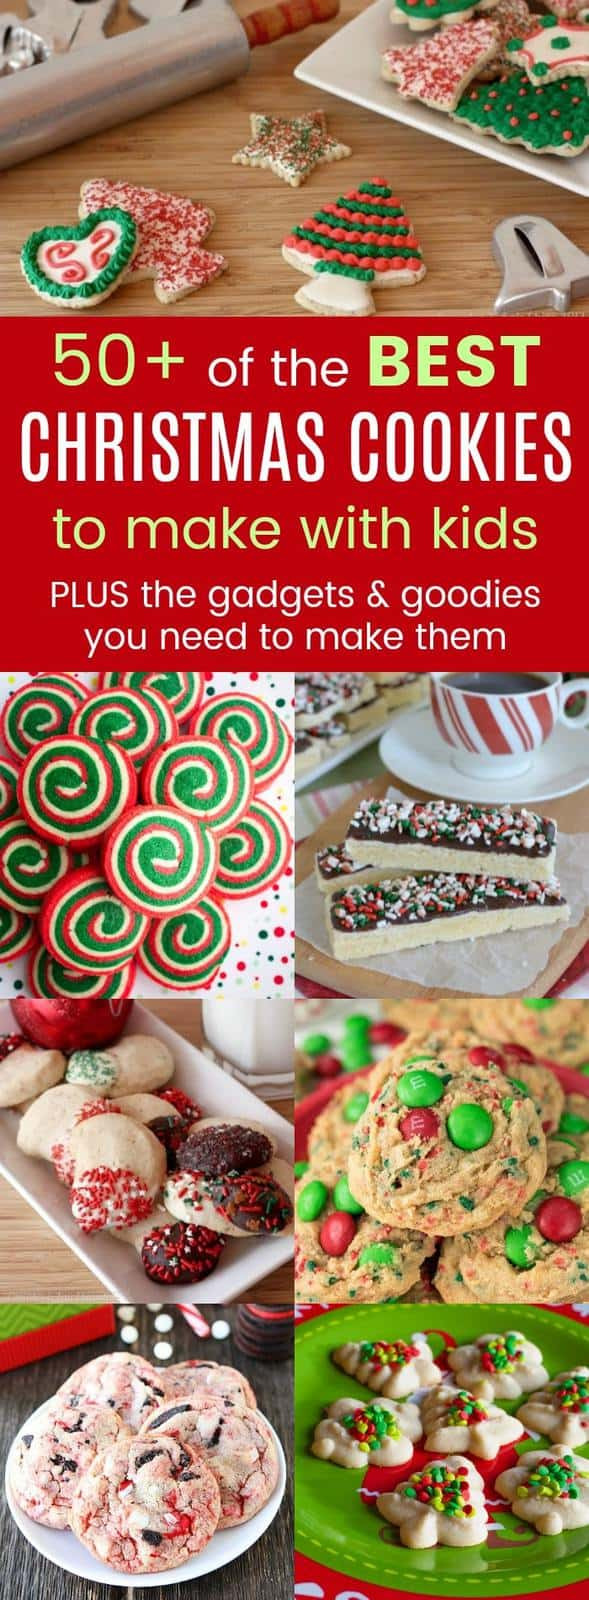 Best Christmas Cookies To Make
 The Best Christmas Cookies for Kids Cupcakes & Kale Chips